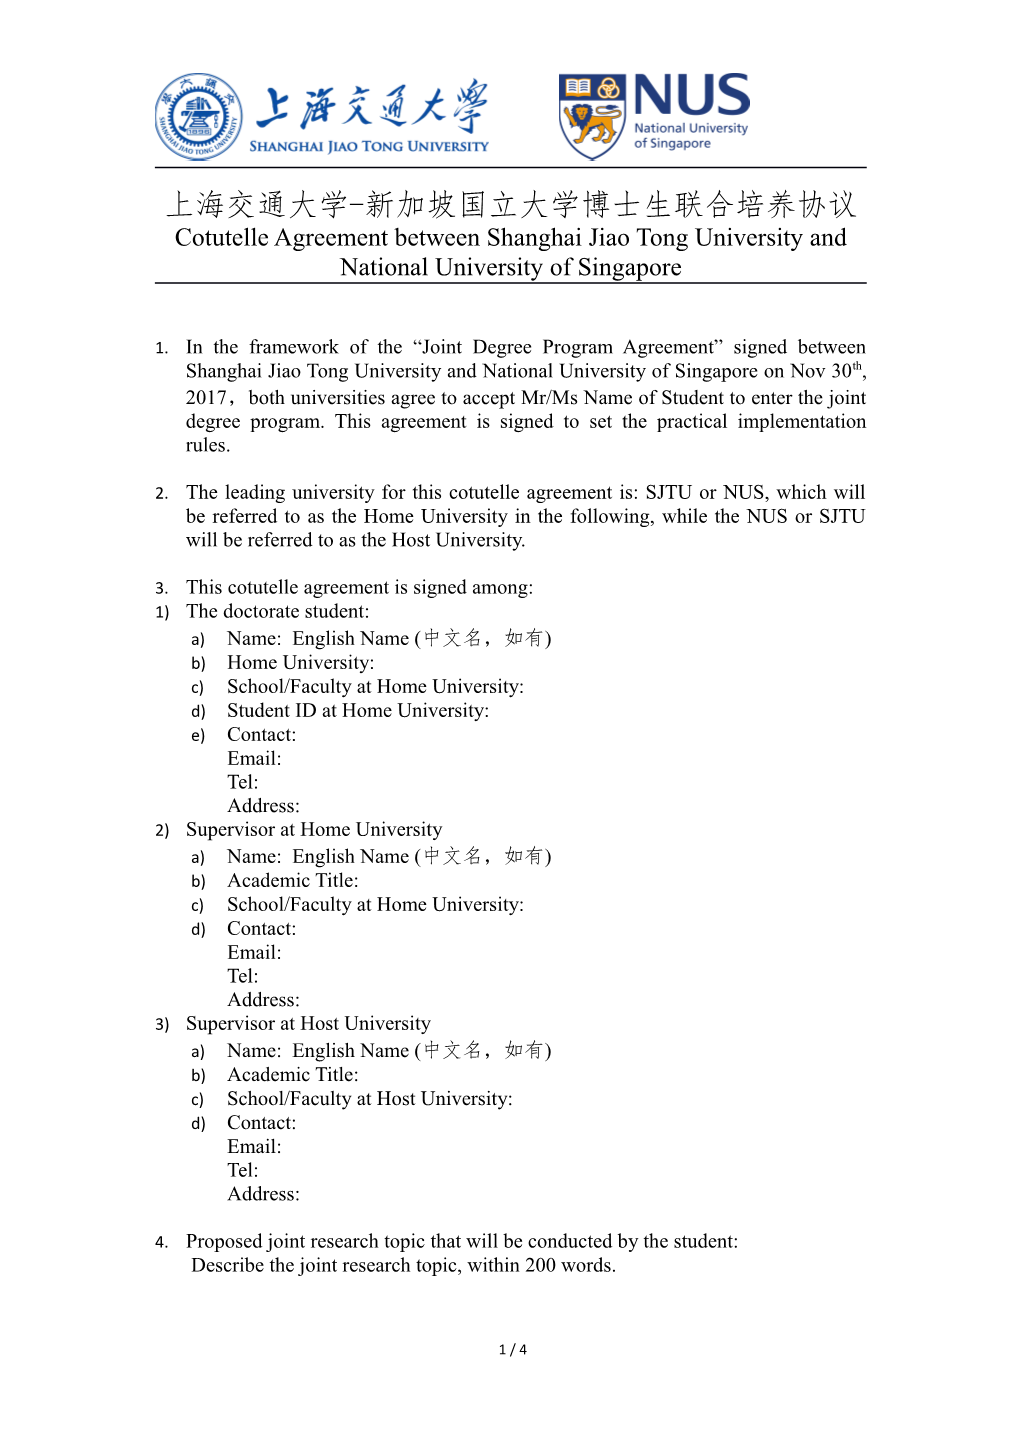 Cotutelle Agreement Between Shanghai Jiao Tong University and National University of Singapore